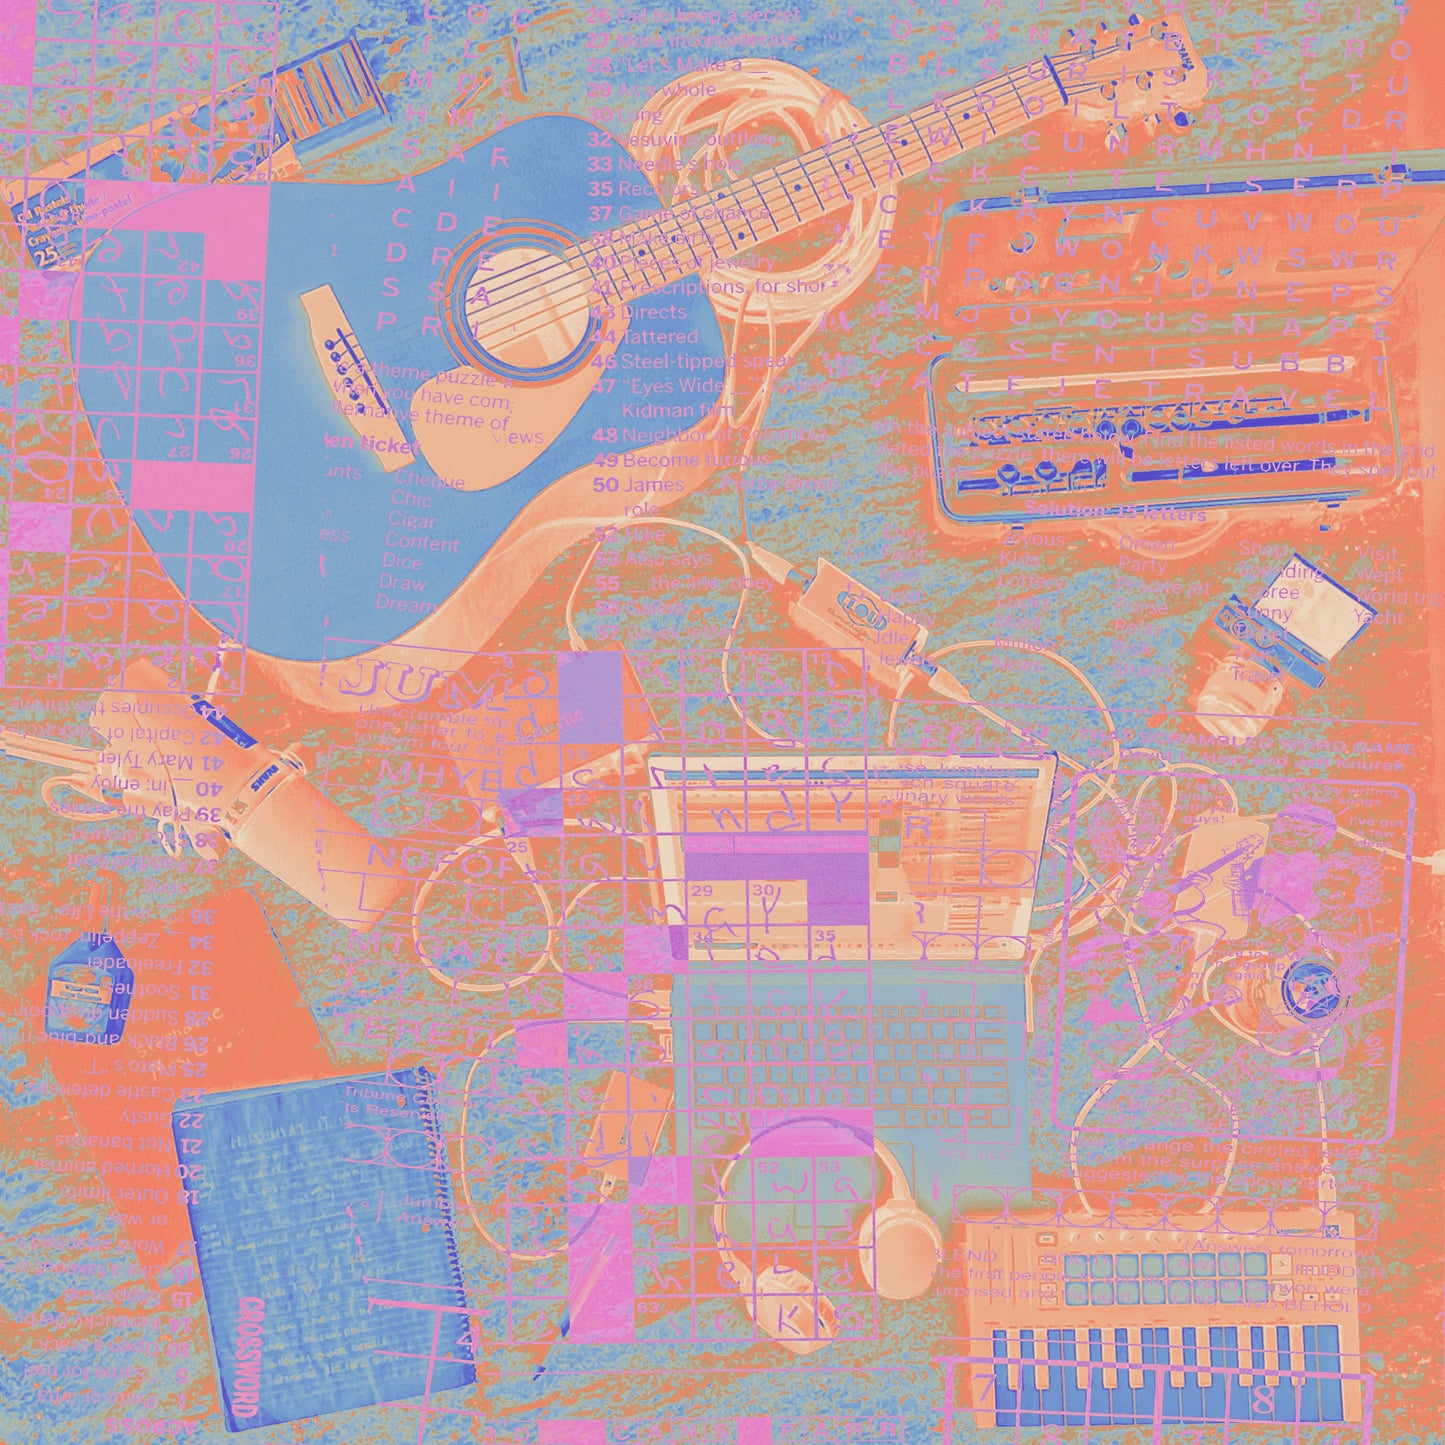 "Old Blue Jeans" Music Gear Collage Print